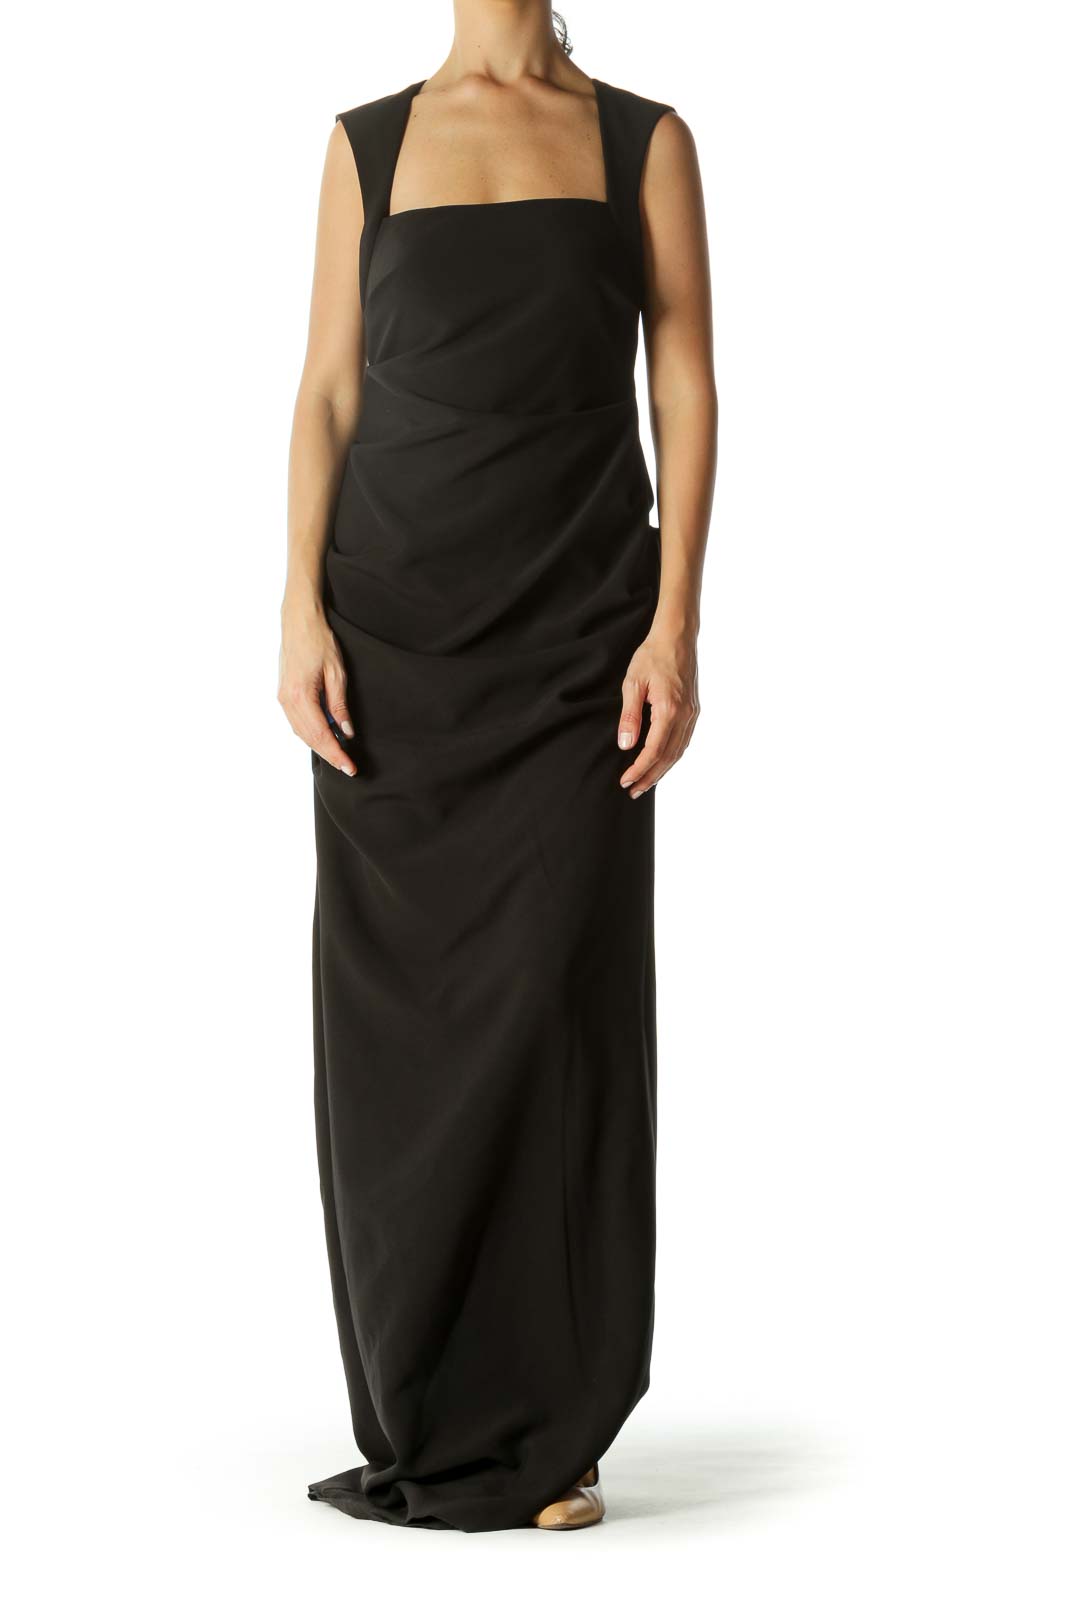 Black Square Neck With Open Back Ruched Slit Evening Dress Front